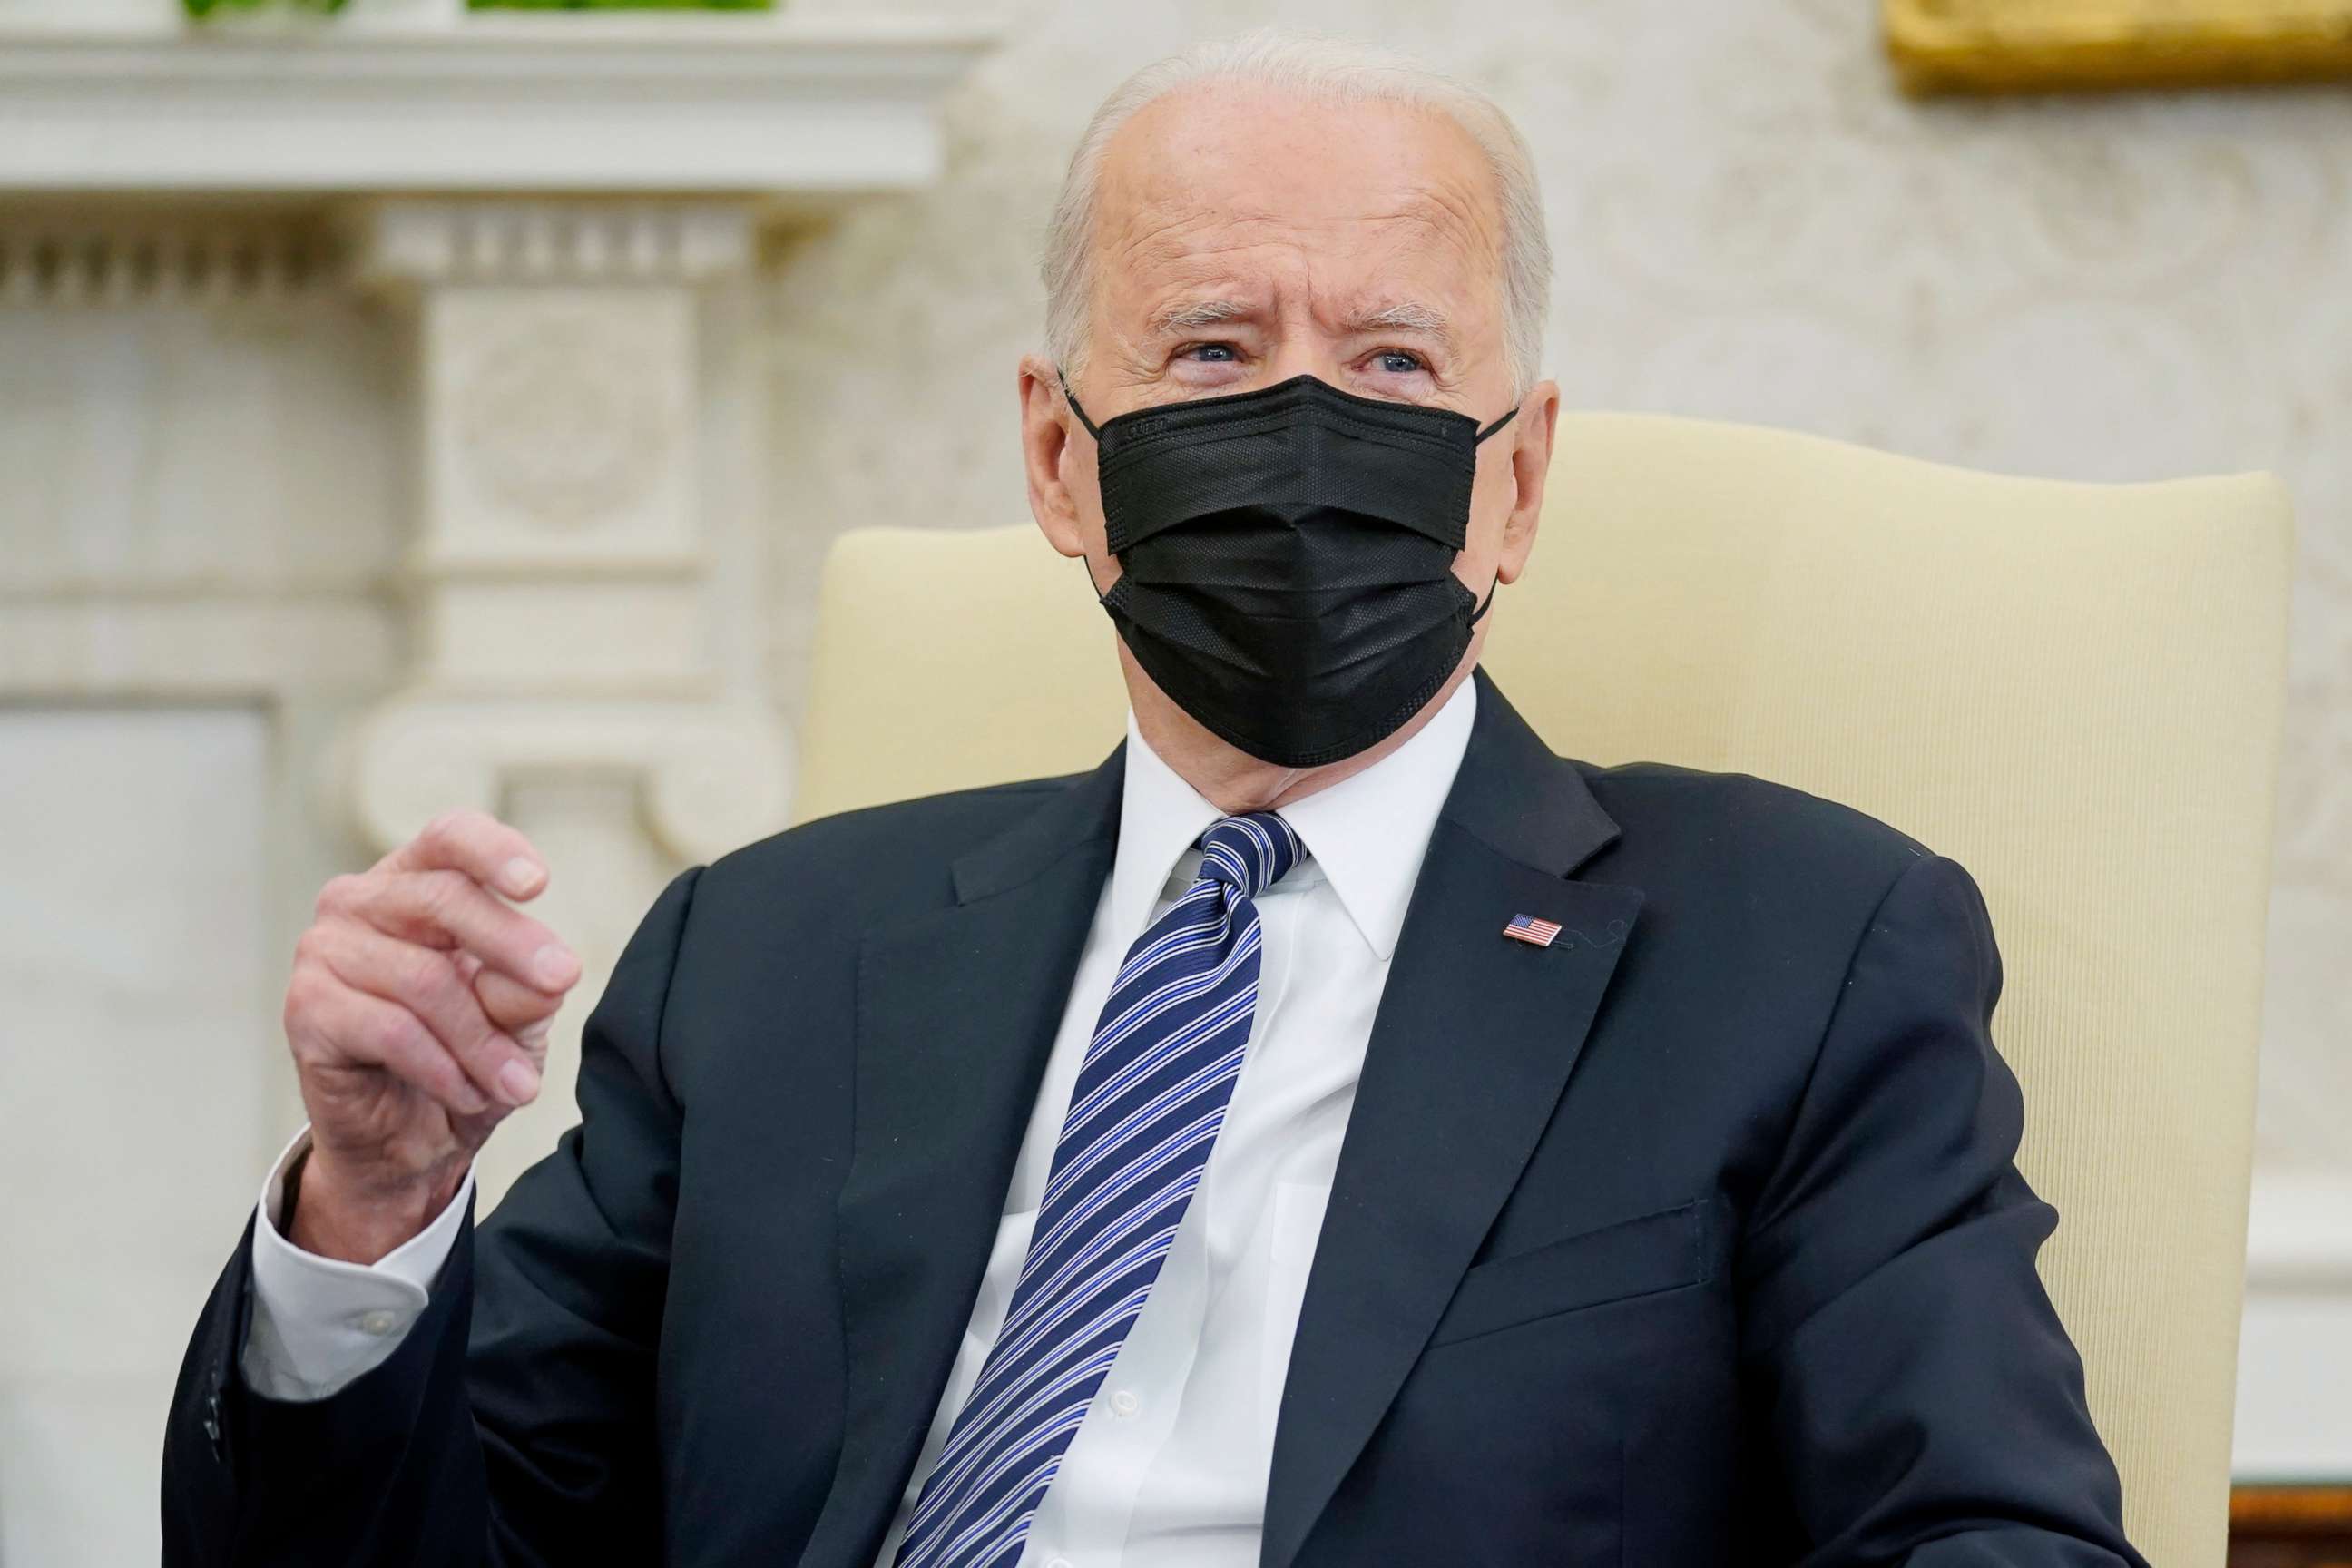 PHOTO: President Joe Biden snaps his fingers as he responds to a reporters question during a meeting with congressional leaders in the Oval Office of the White House, May 12, 2021, in Washington.